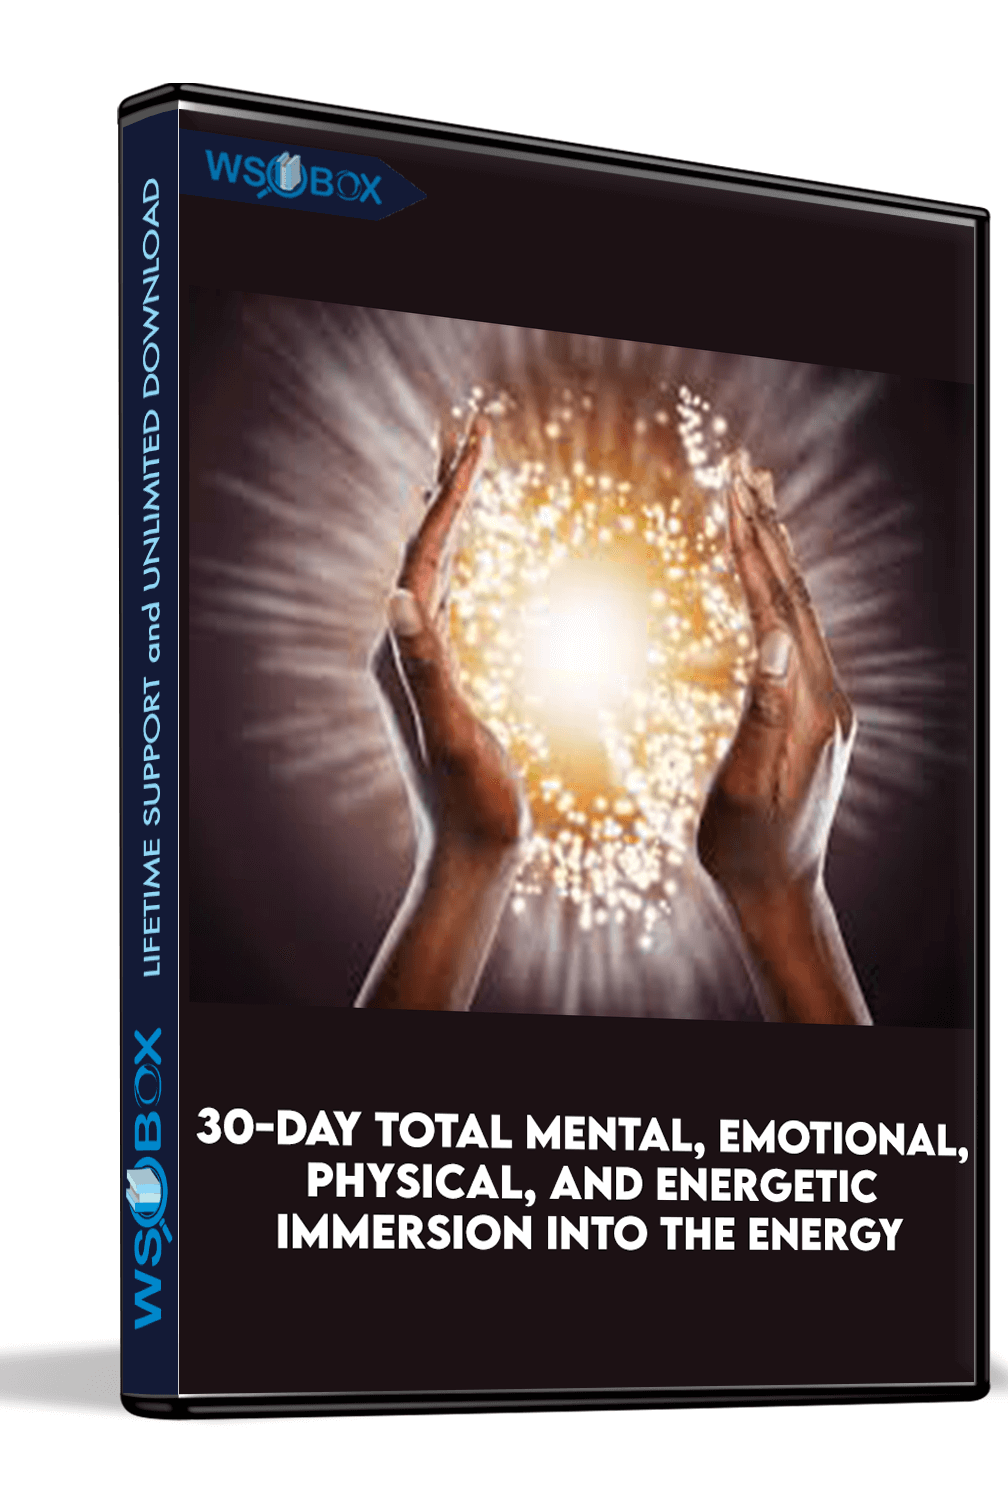 30-Day Total Mental, Emotional, Physical, and Energetic Immersion into the Energy